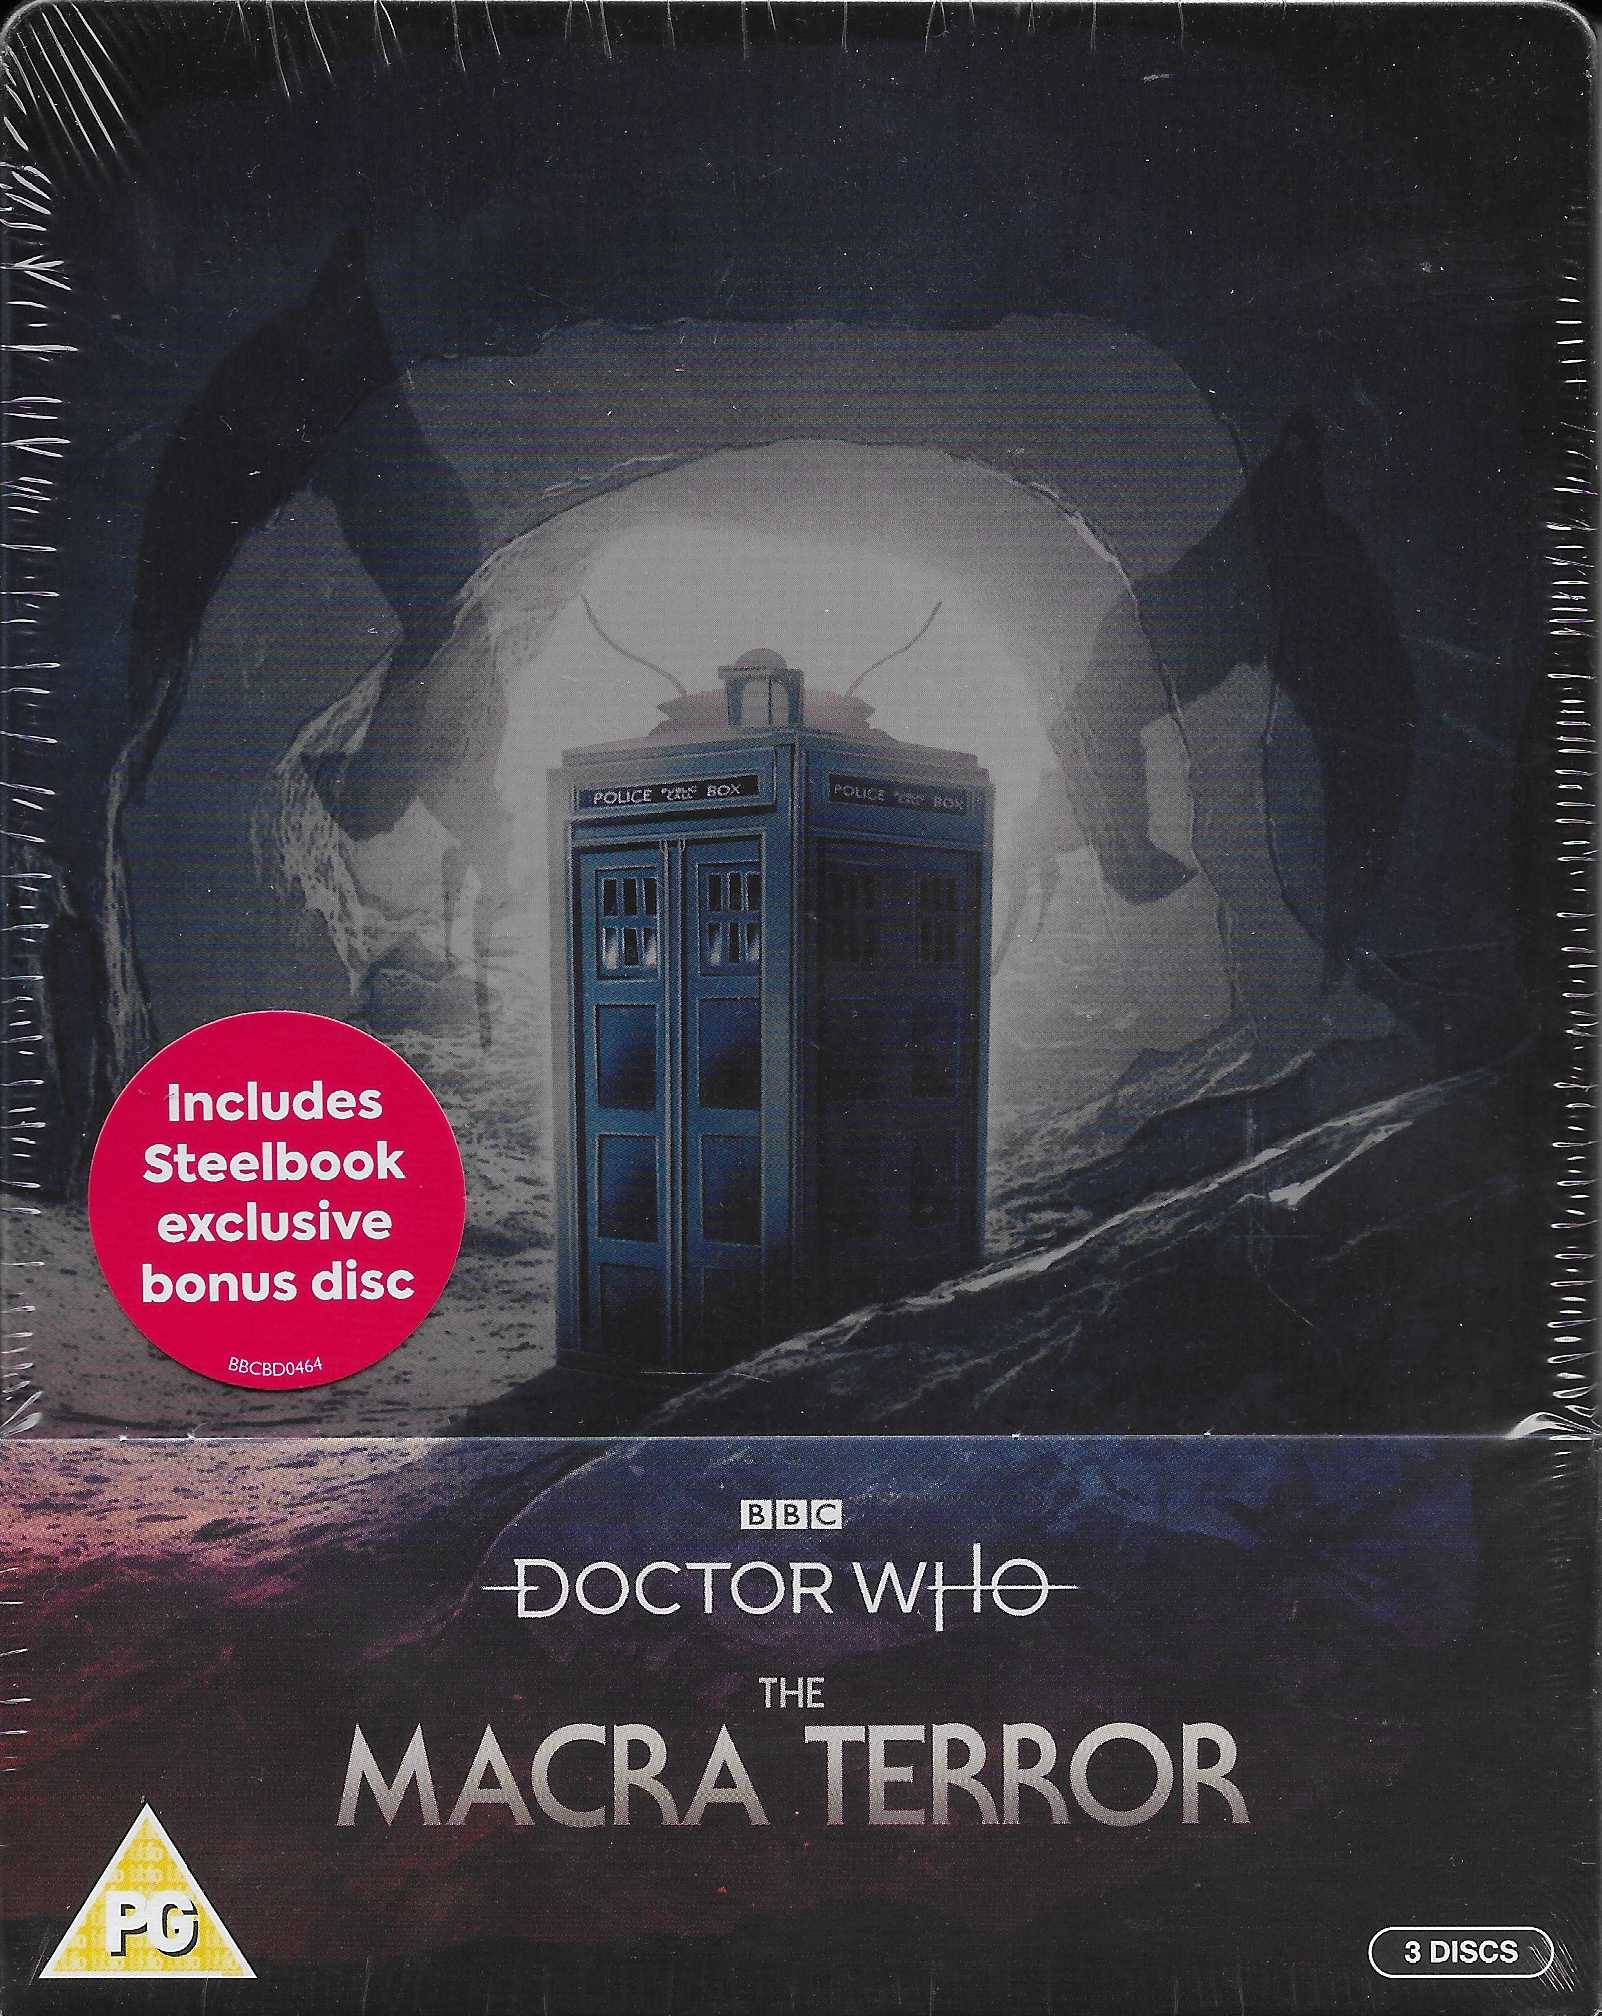 Picture of BBCBD 0464 Doctor Who - The Macra terror (Limited edition) by artist Ian Stuart Black from the BBC blu-rays - Records and Tapes library